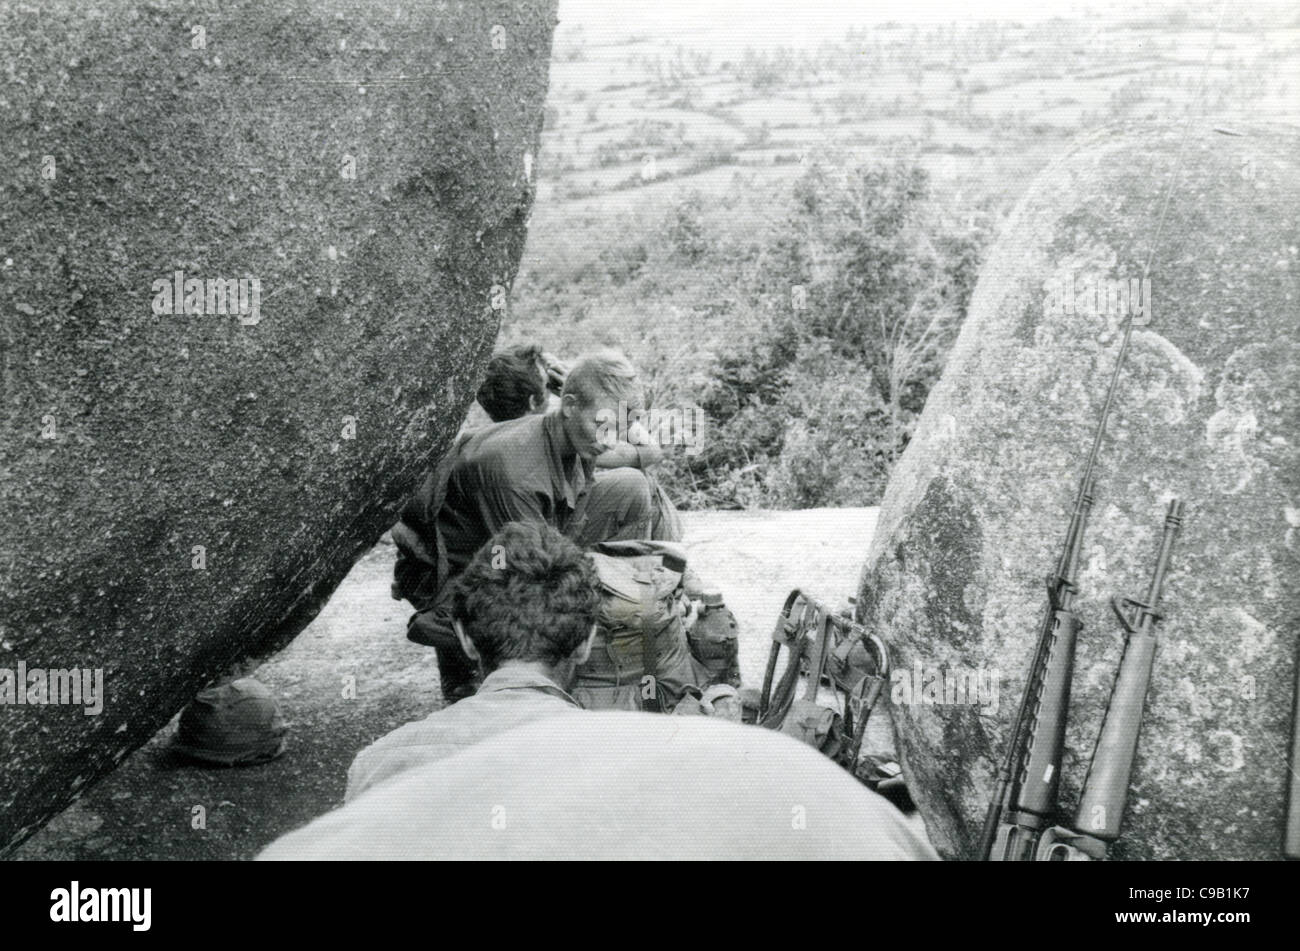 US soldiers on high area next to rocks m16s m16 rifle. 101st ABN in the Ashau Valley during the Vietnam War. Stock Photo